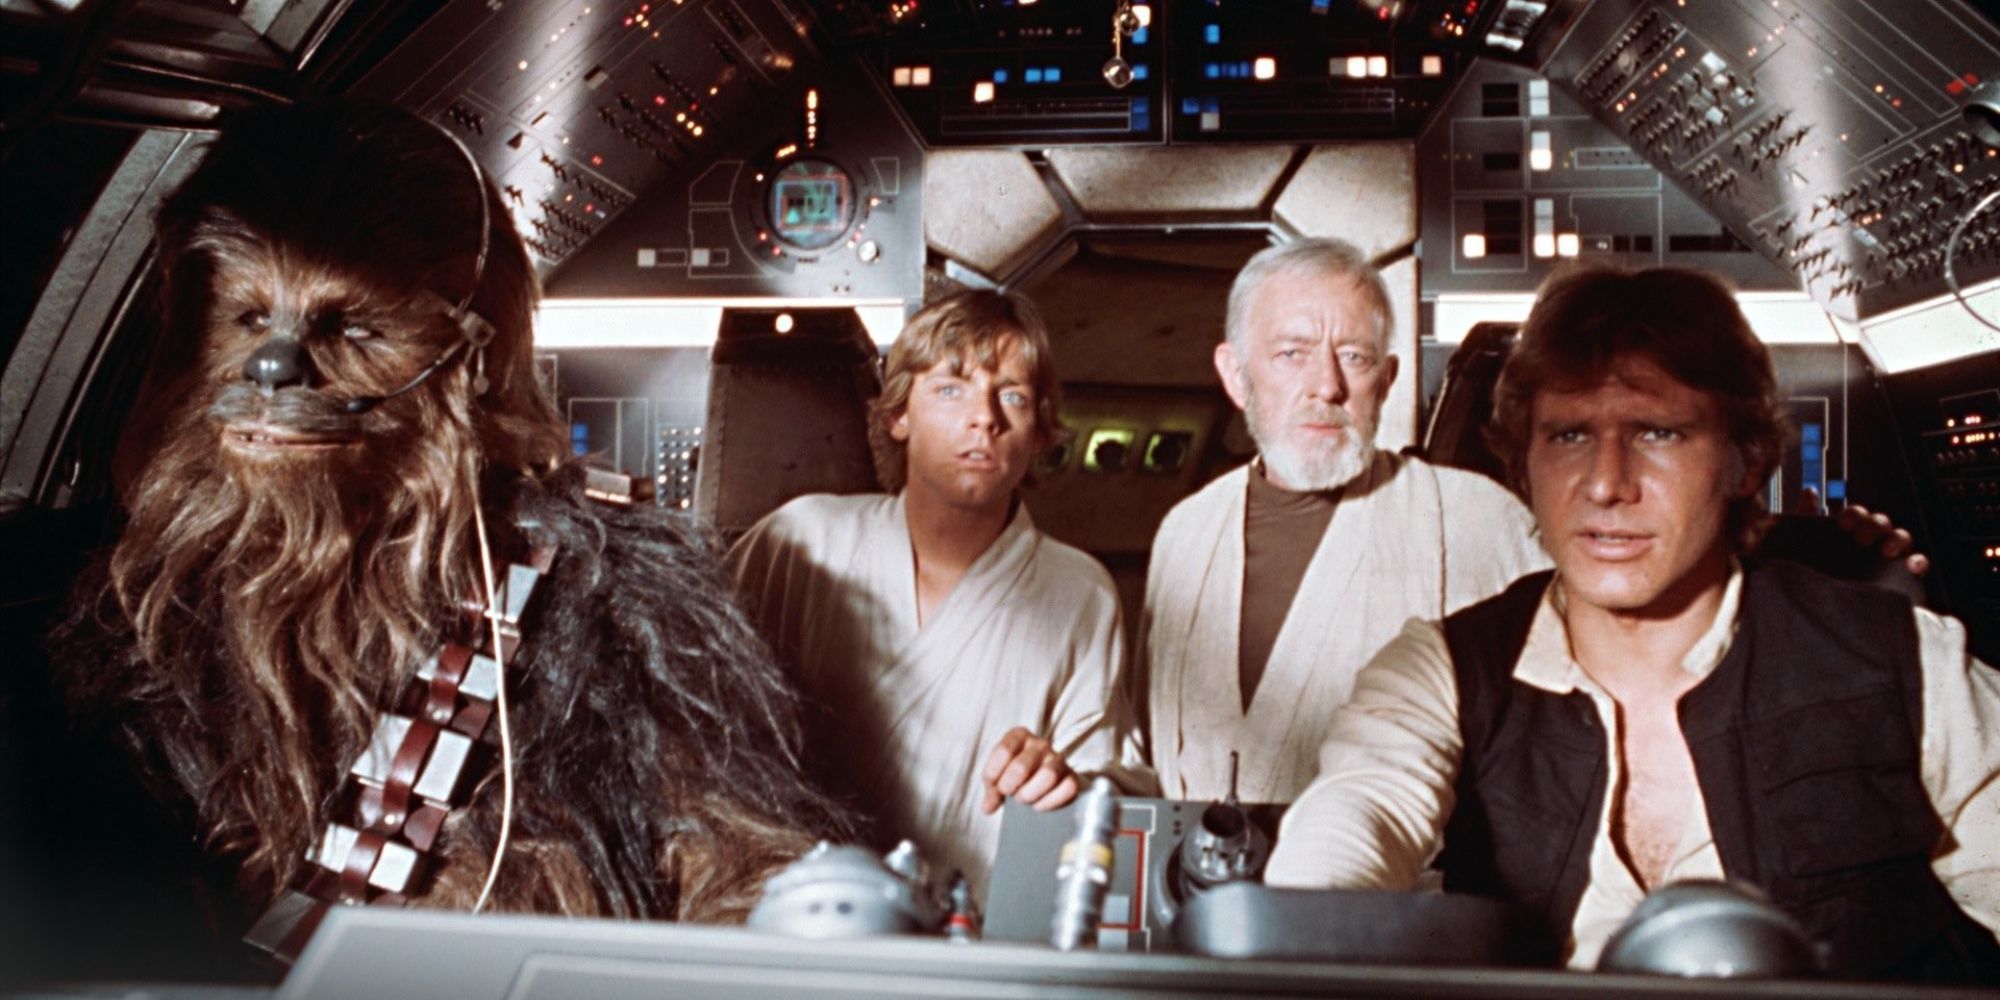 Han and Chewbacca pilot the Millennium Falcon, with Luke and Obi-Wan in the back